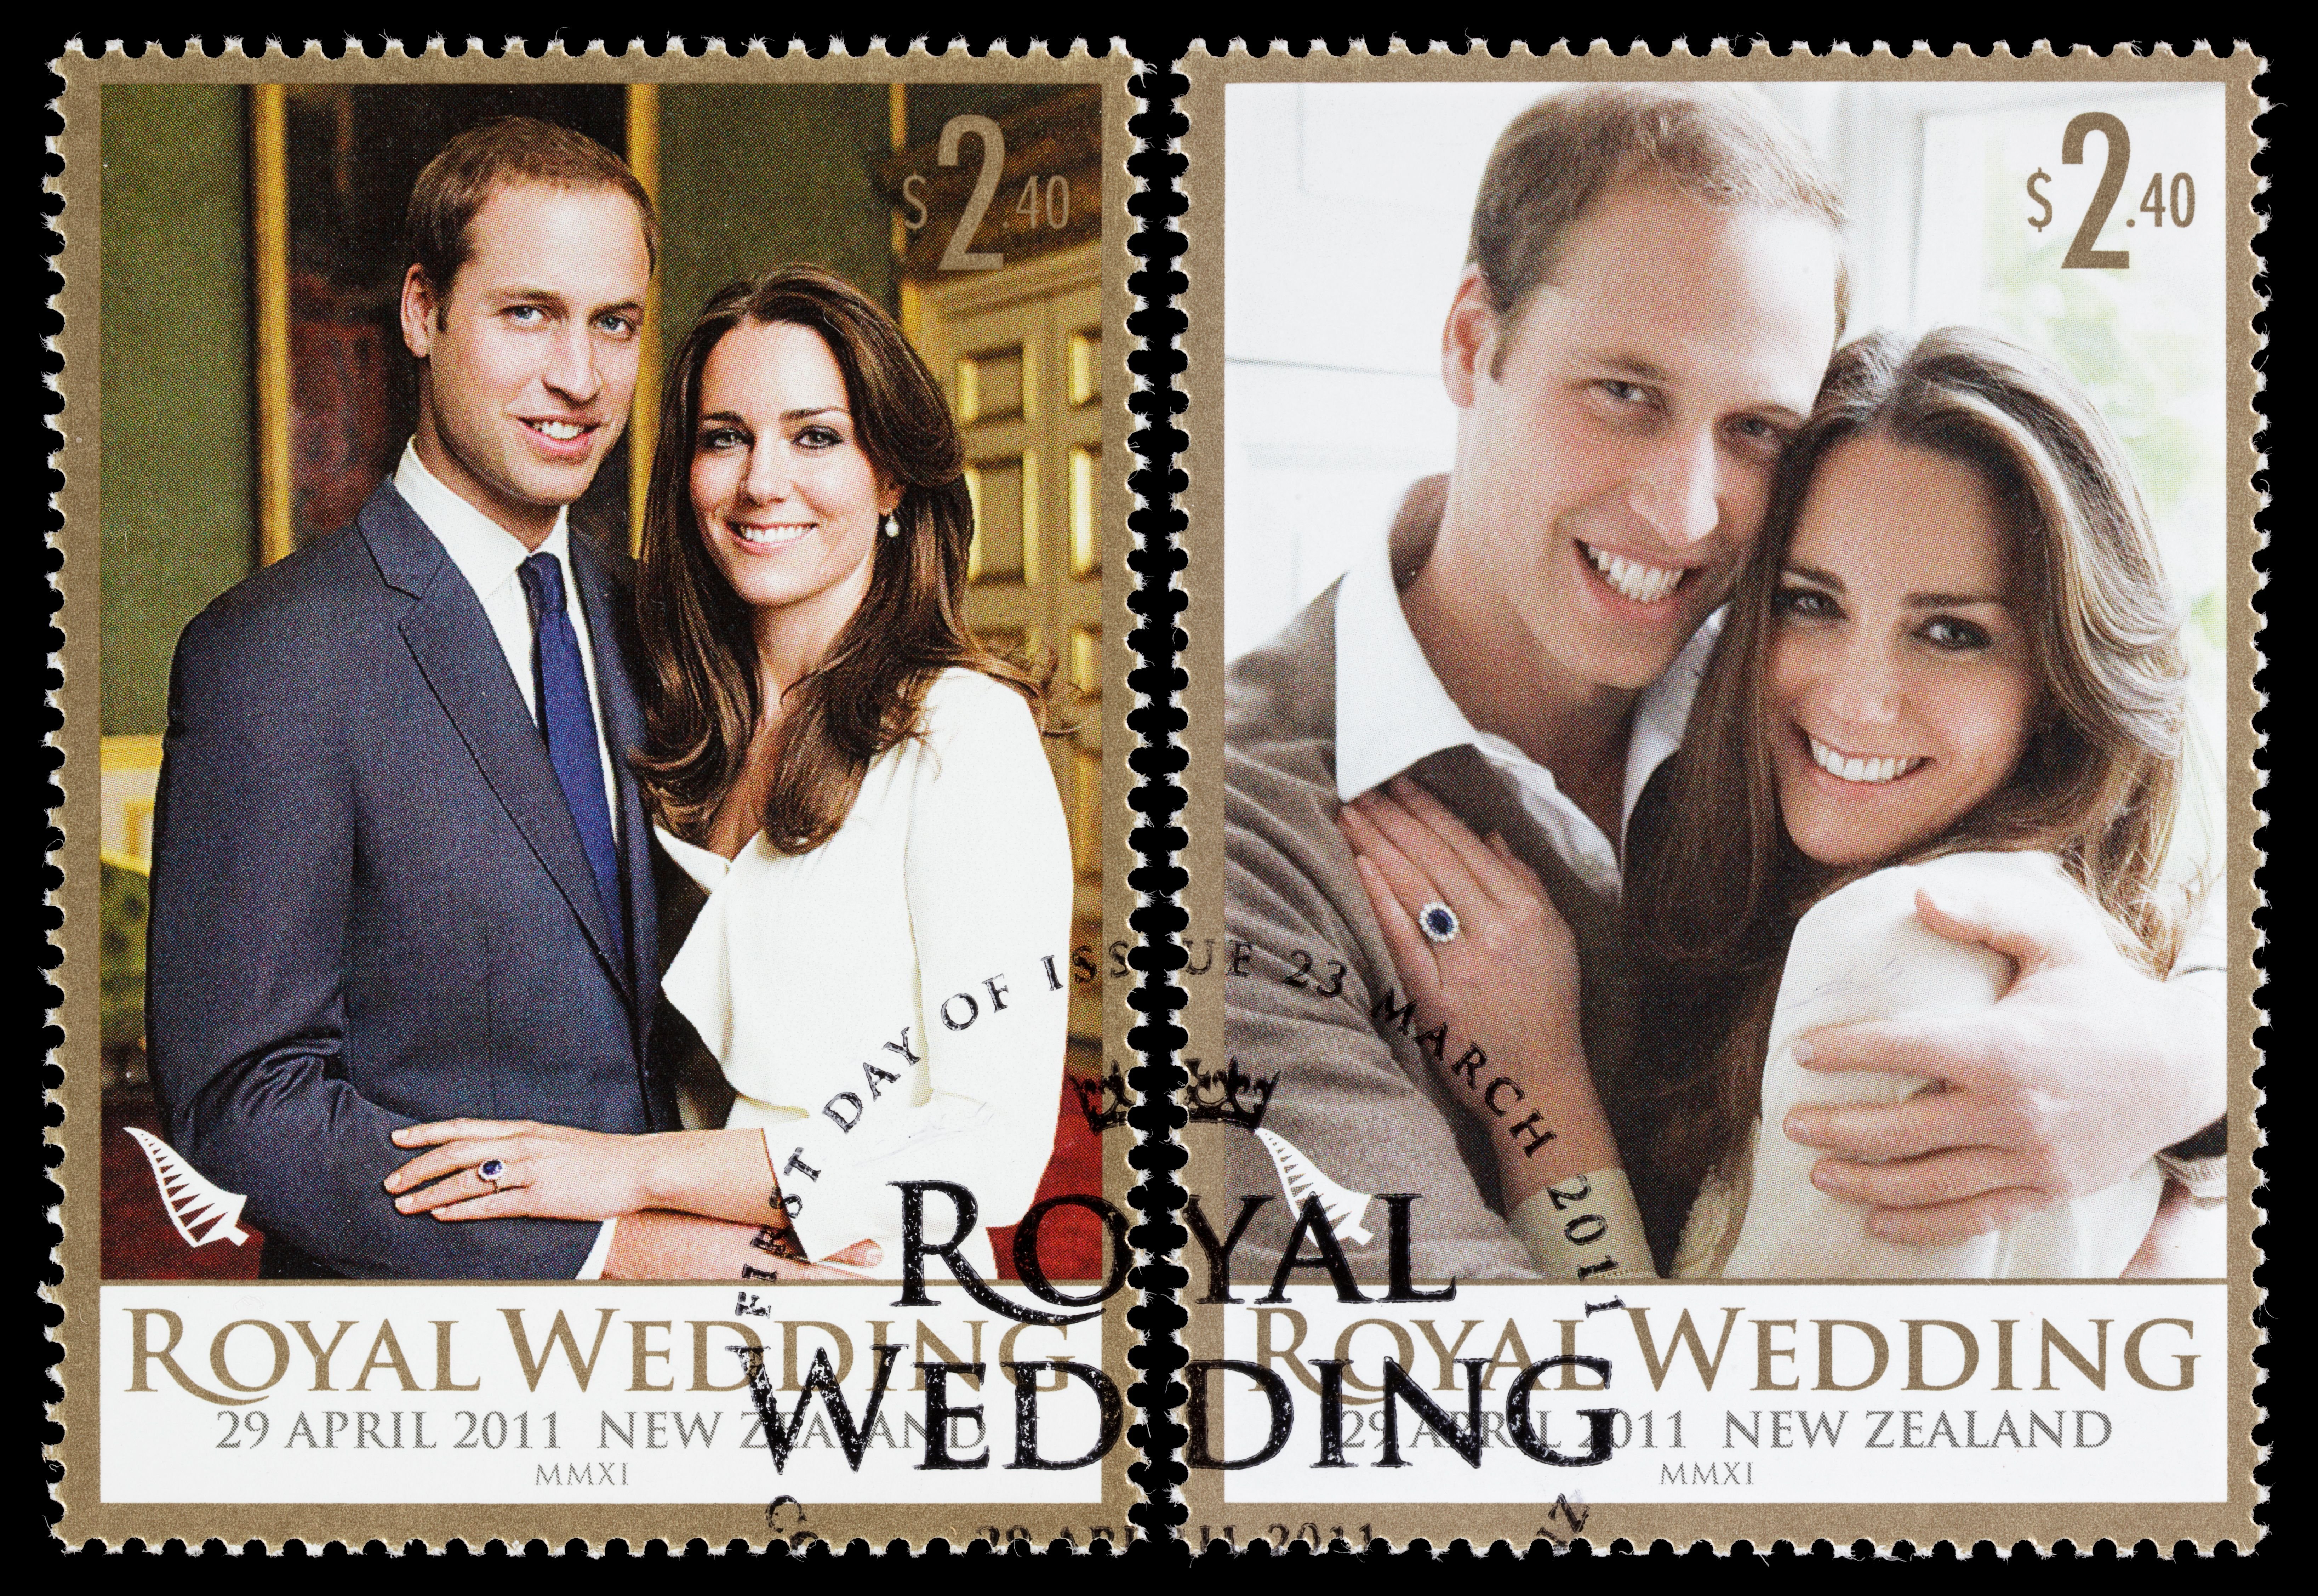 Photo of Prince William and Kate Middleton's wedding invitation | Photo: Getty Images